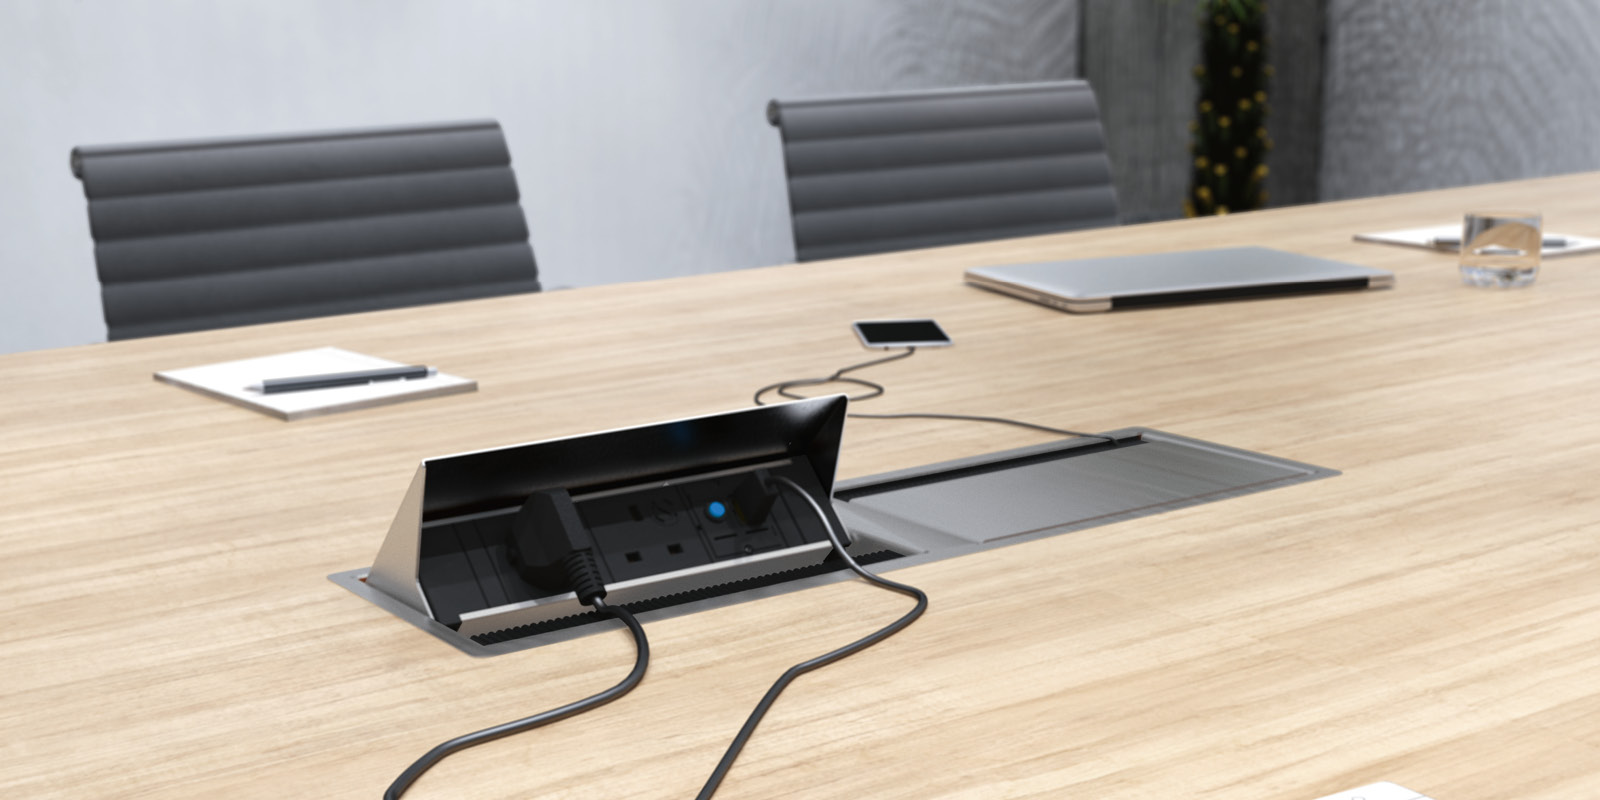 Coni Duo power and data outlet mounted on desk with one side open and the other closed close-up